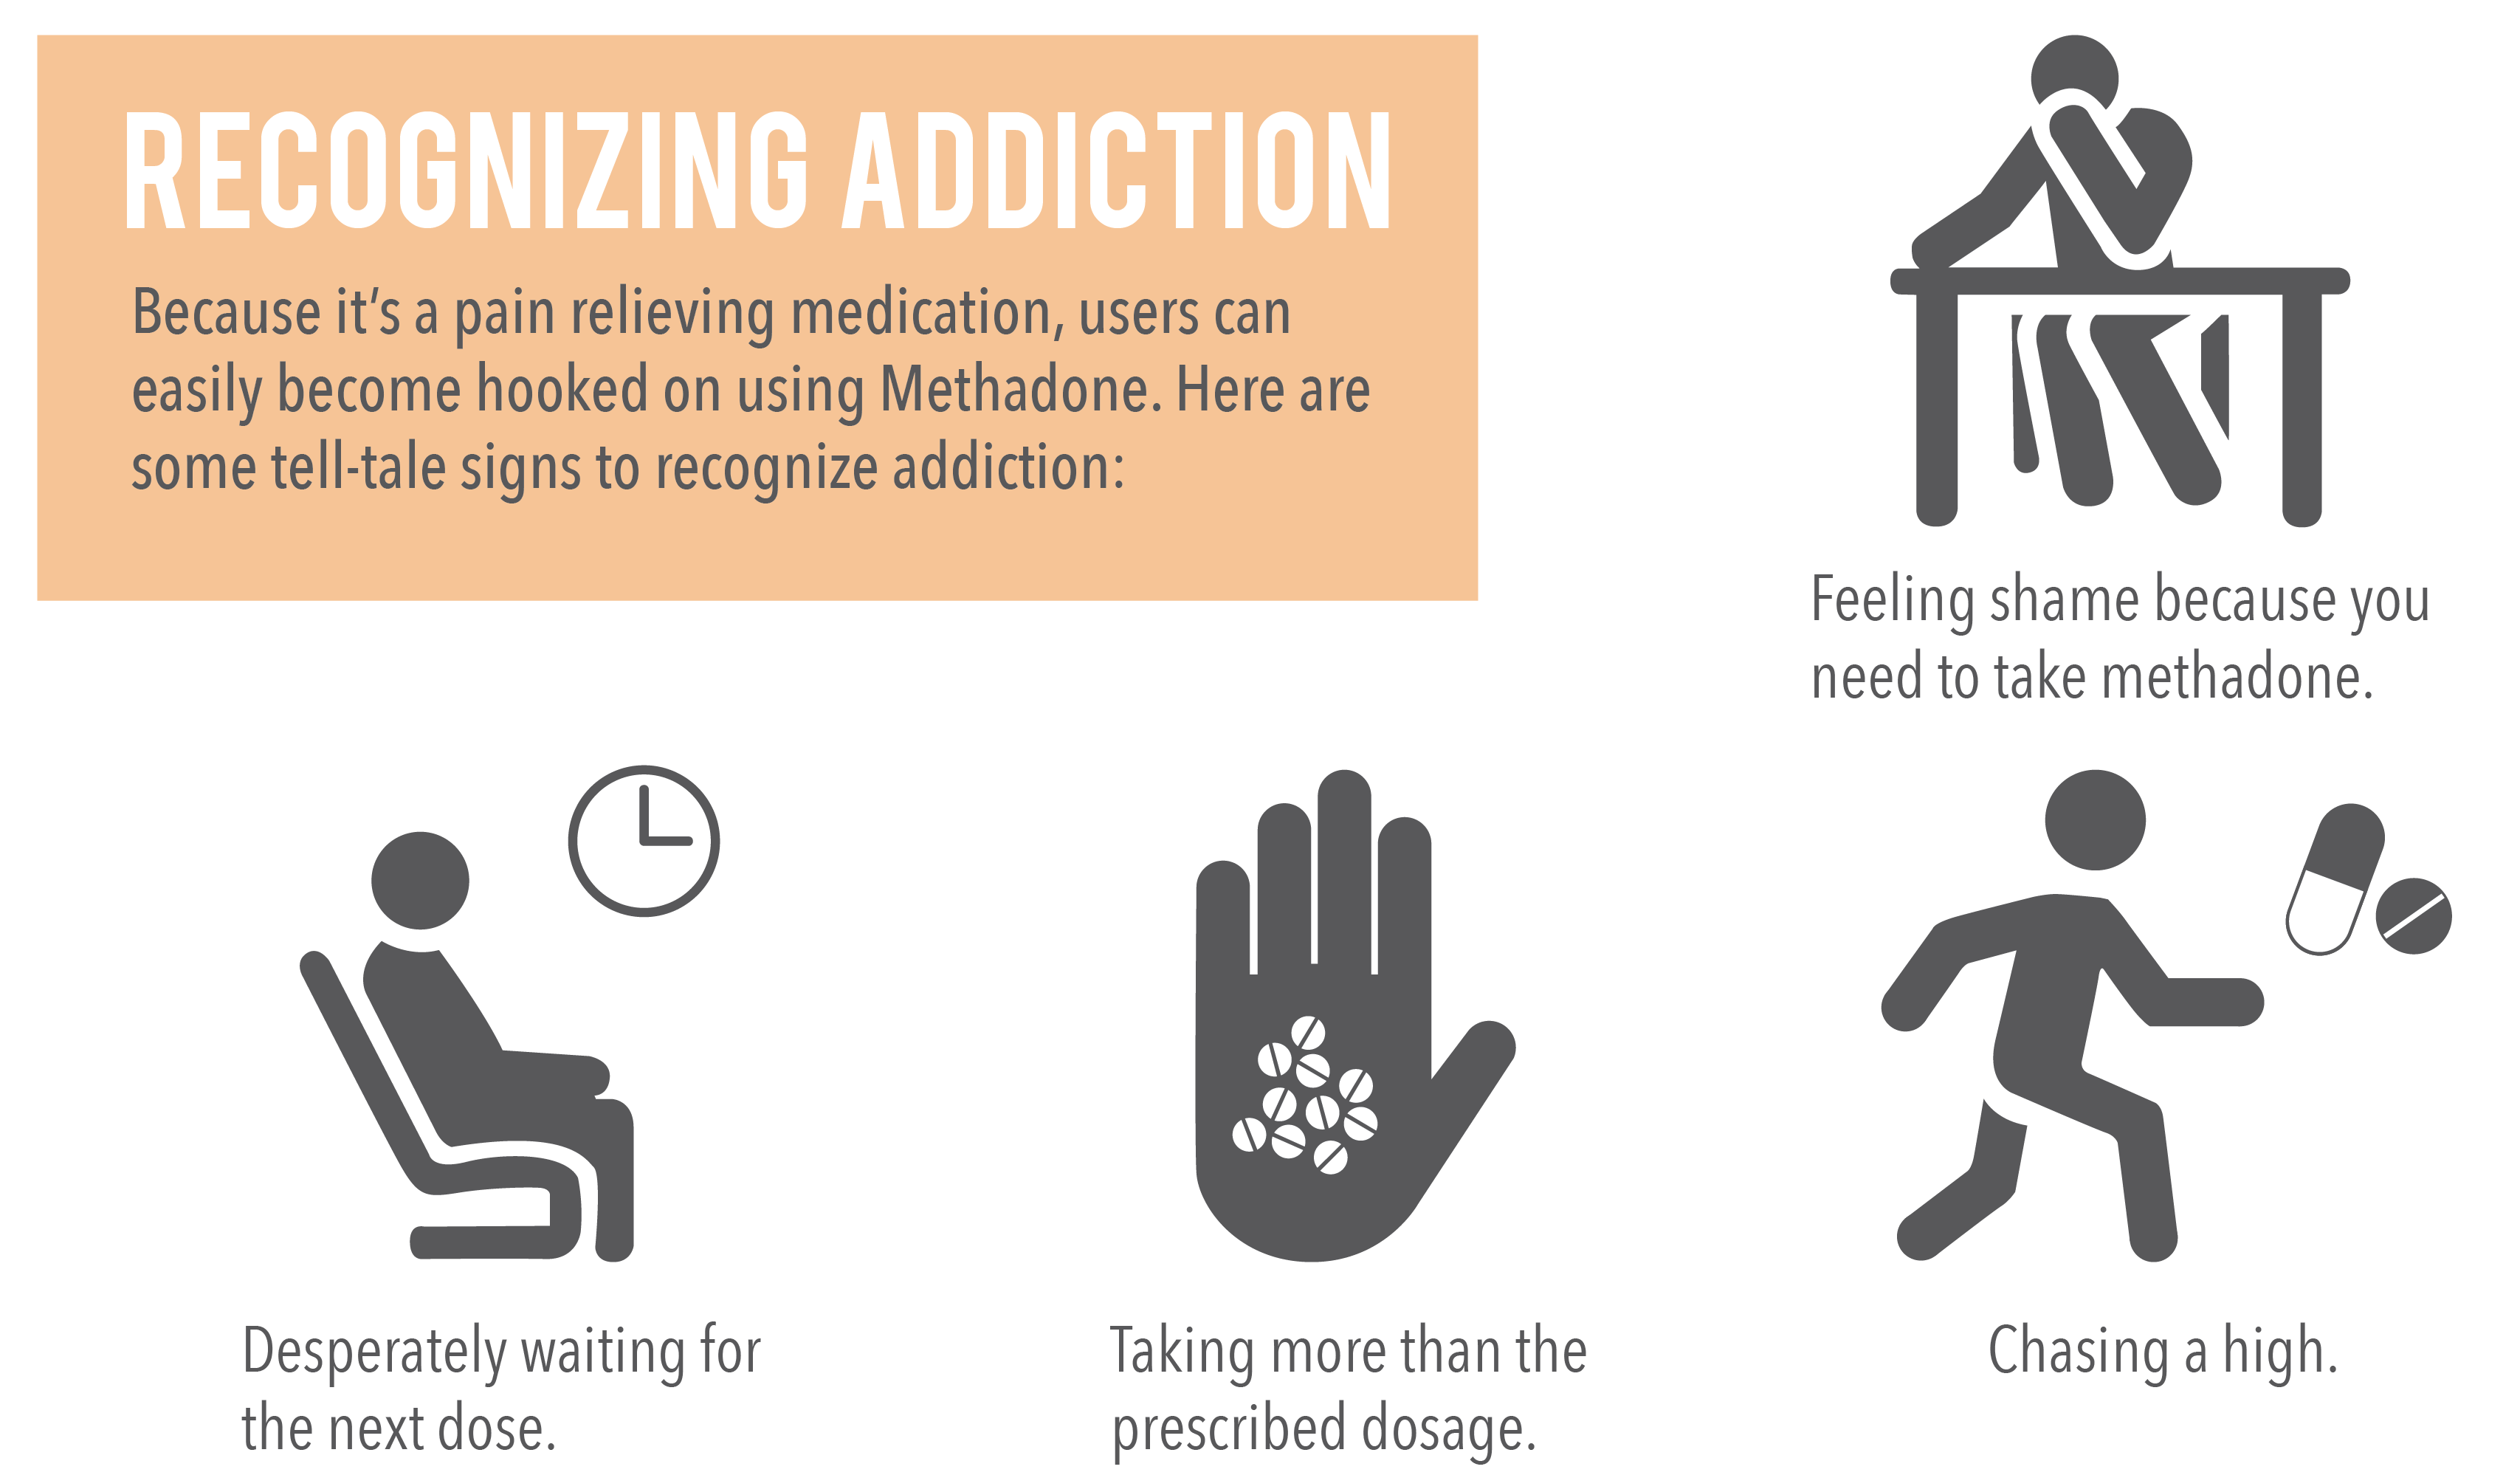 Because it is a pain relieving medication, users can easily become hooked on using methadone. Some tell tale signs to recognize addiction are feeling shame because you need to take methadone, desperately waiting for the next dose, taking more than the prescribed dosage and chasing a high